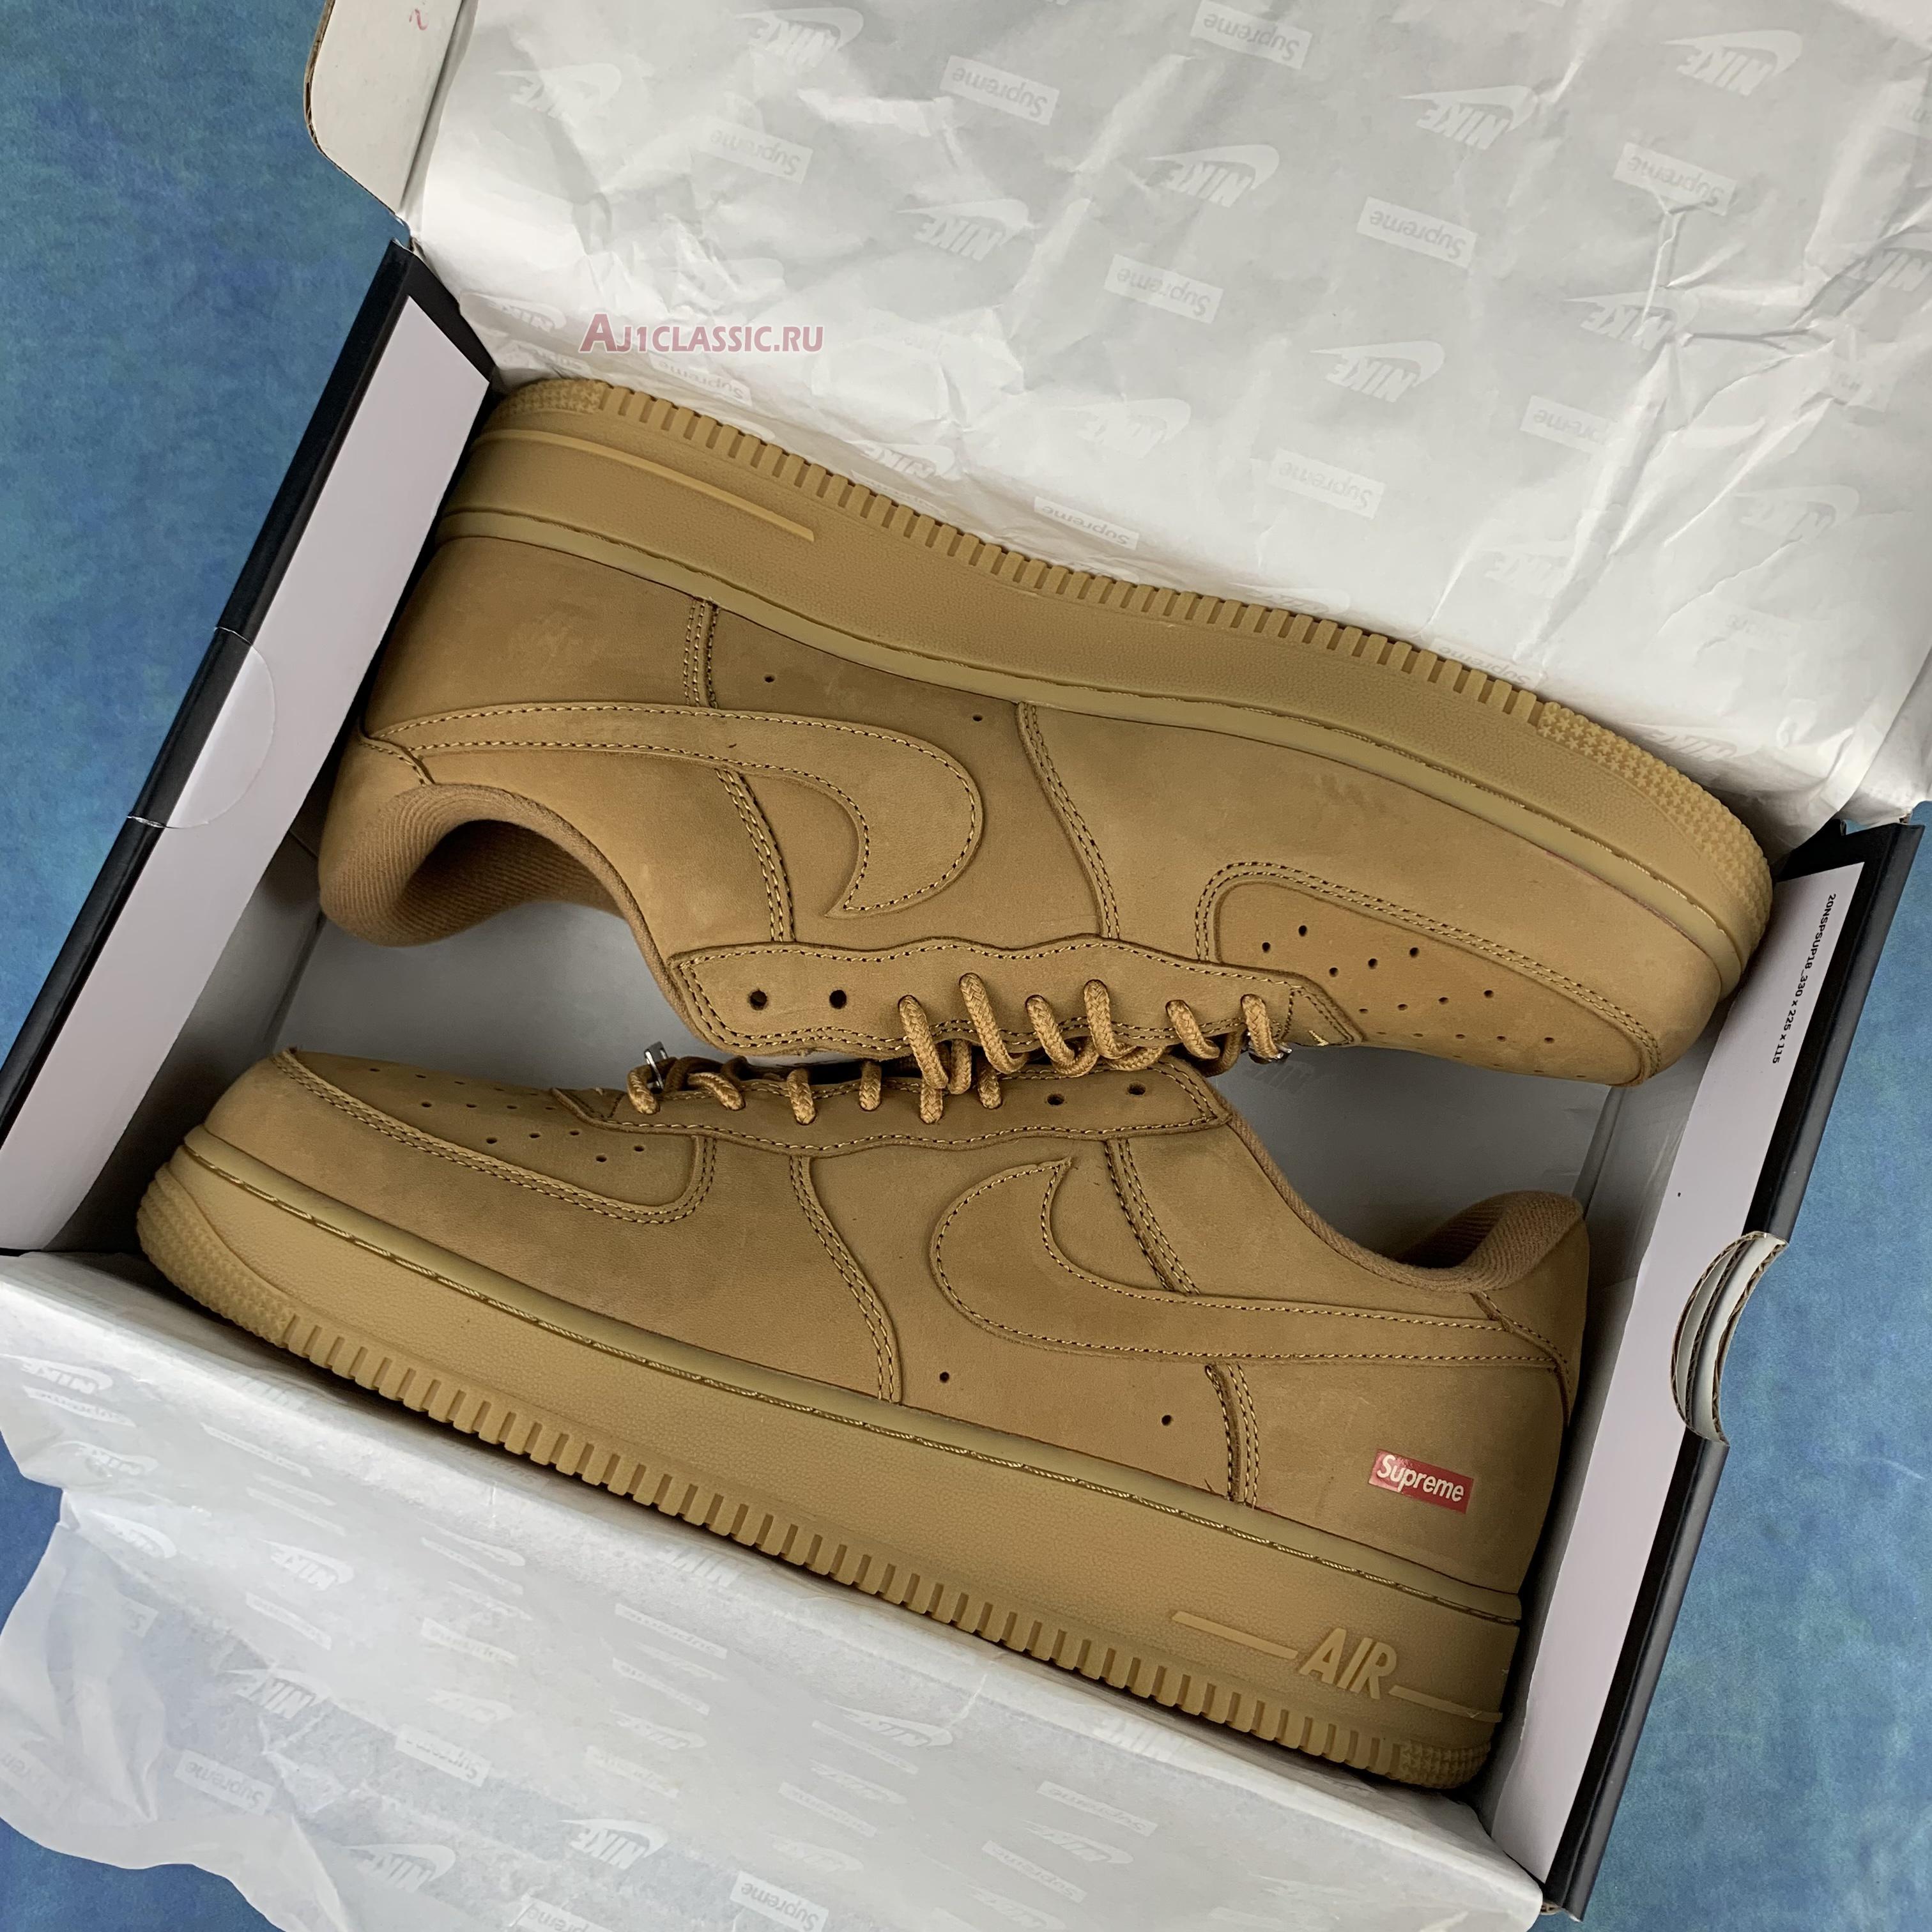 Supreme x Nike Air Force 1 Low SP Wheat DN1555-200 Flax/Flax/Gum Light Brown Sneakers